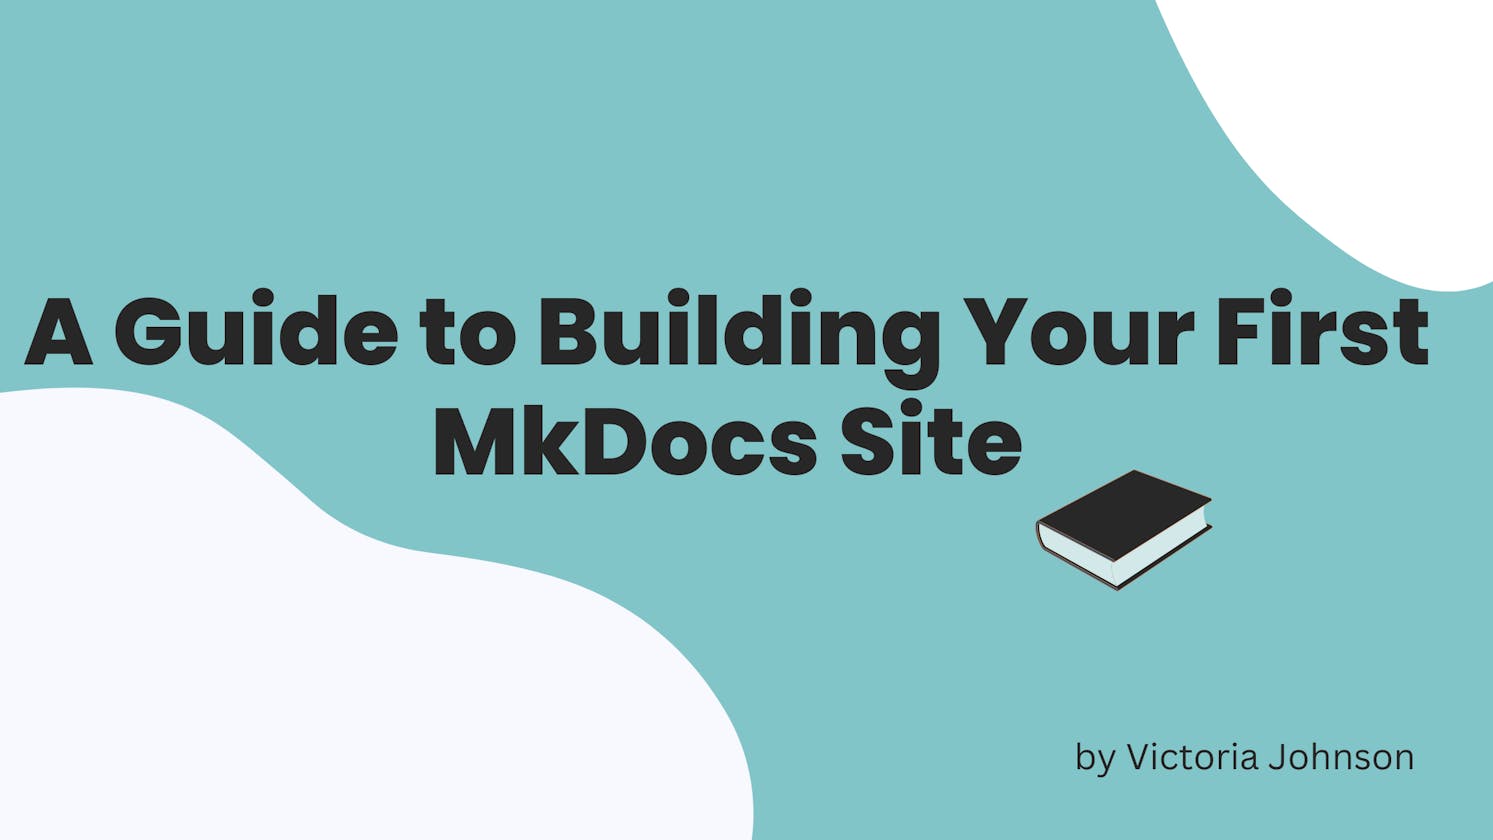 Getting Started with MkDocs: How to Build Your First Documentation Site